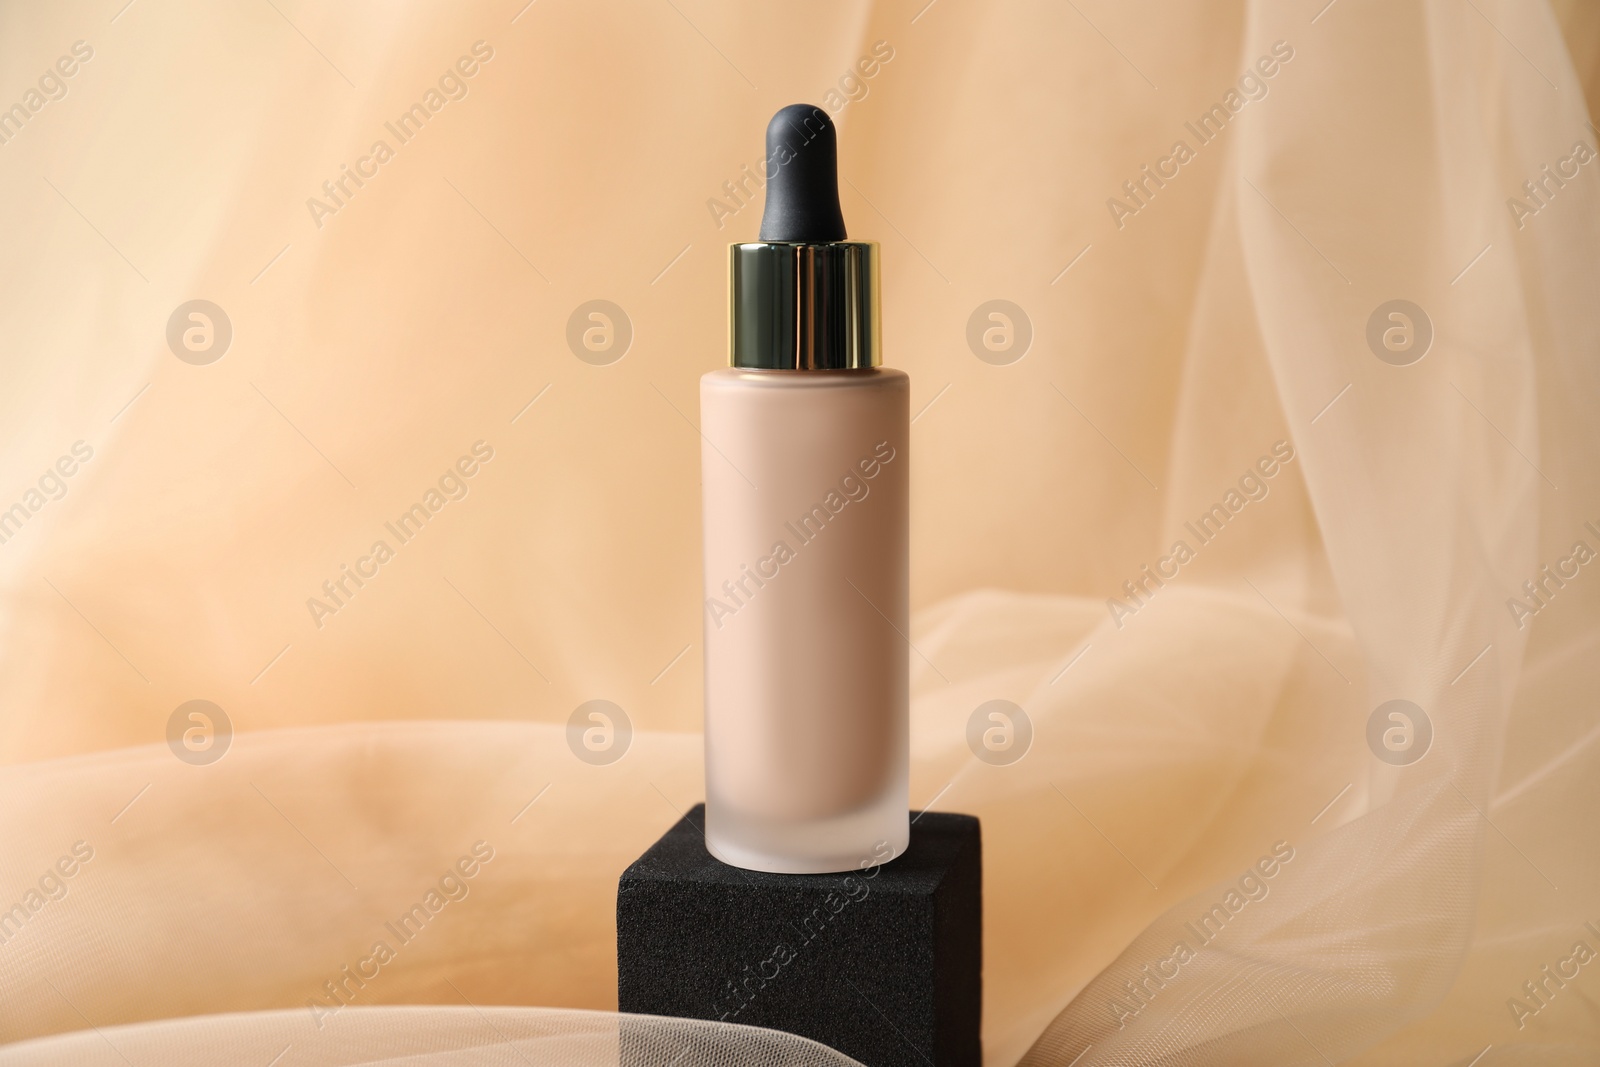 Photo of Bottle of skin foundation on beige tulle fabric. Makeup product